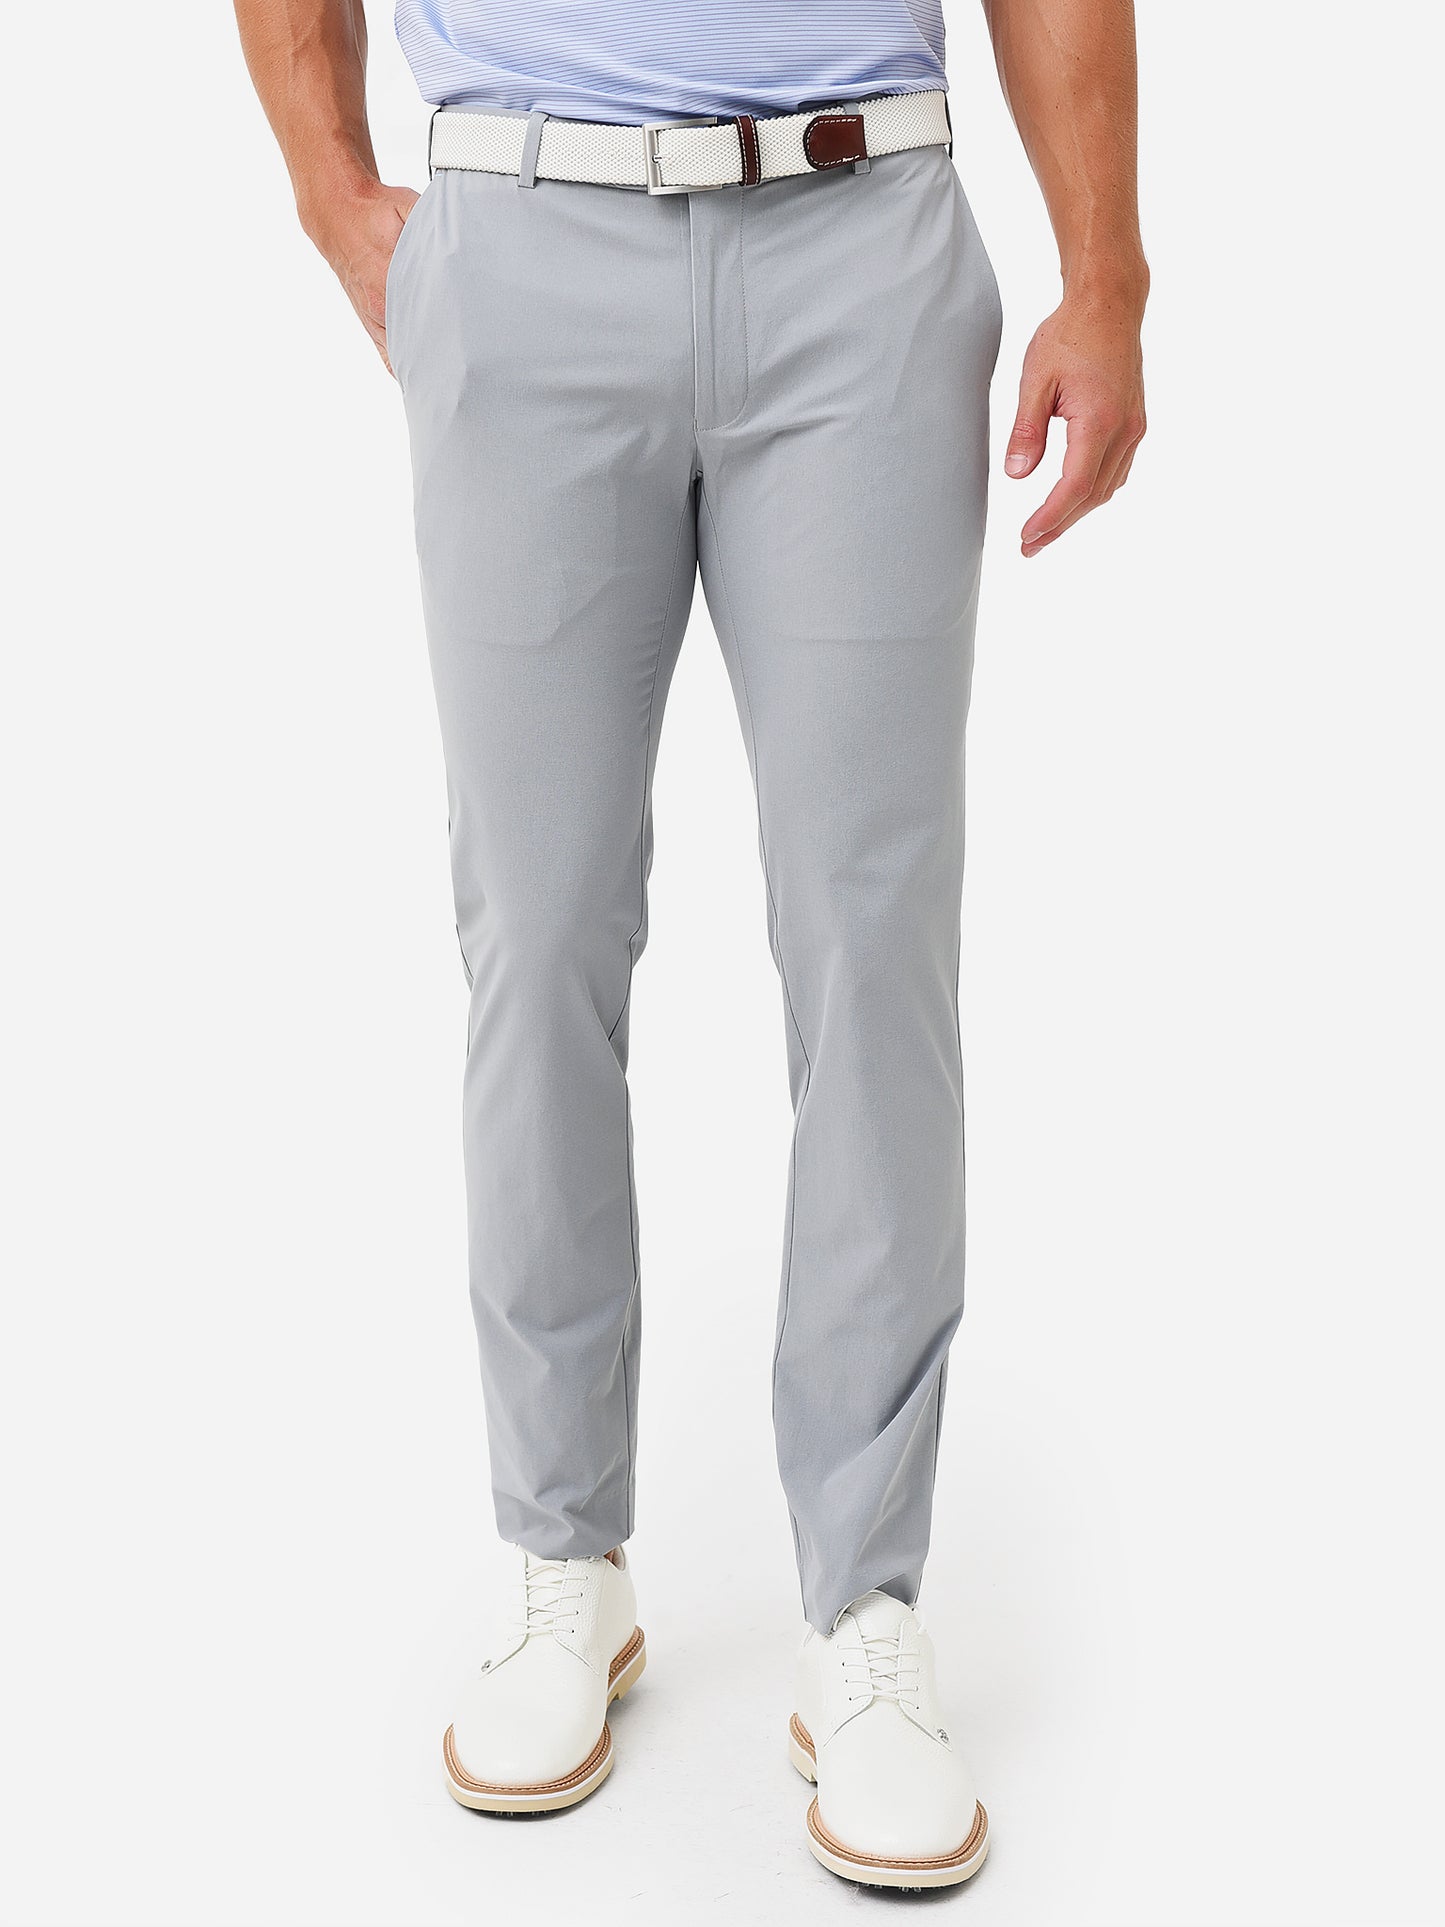 Peter Millar Crown Crafted Men's Surge Performance Trouser